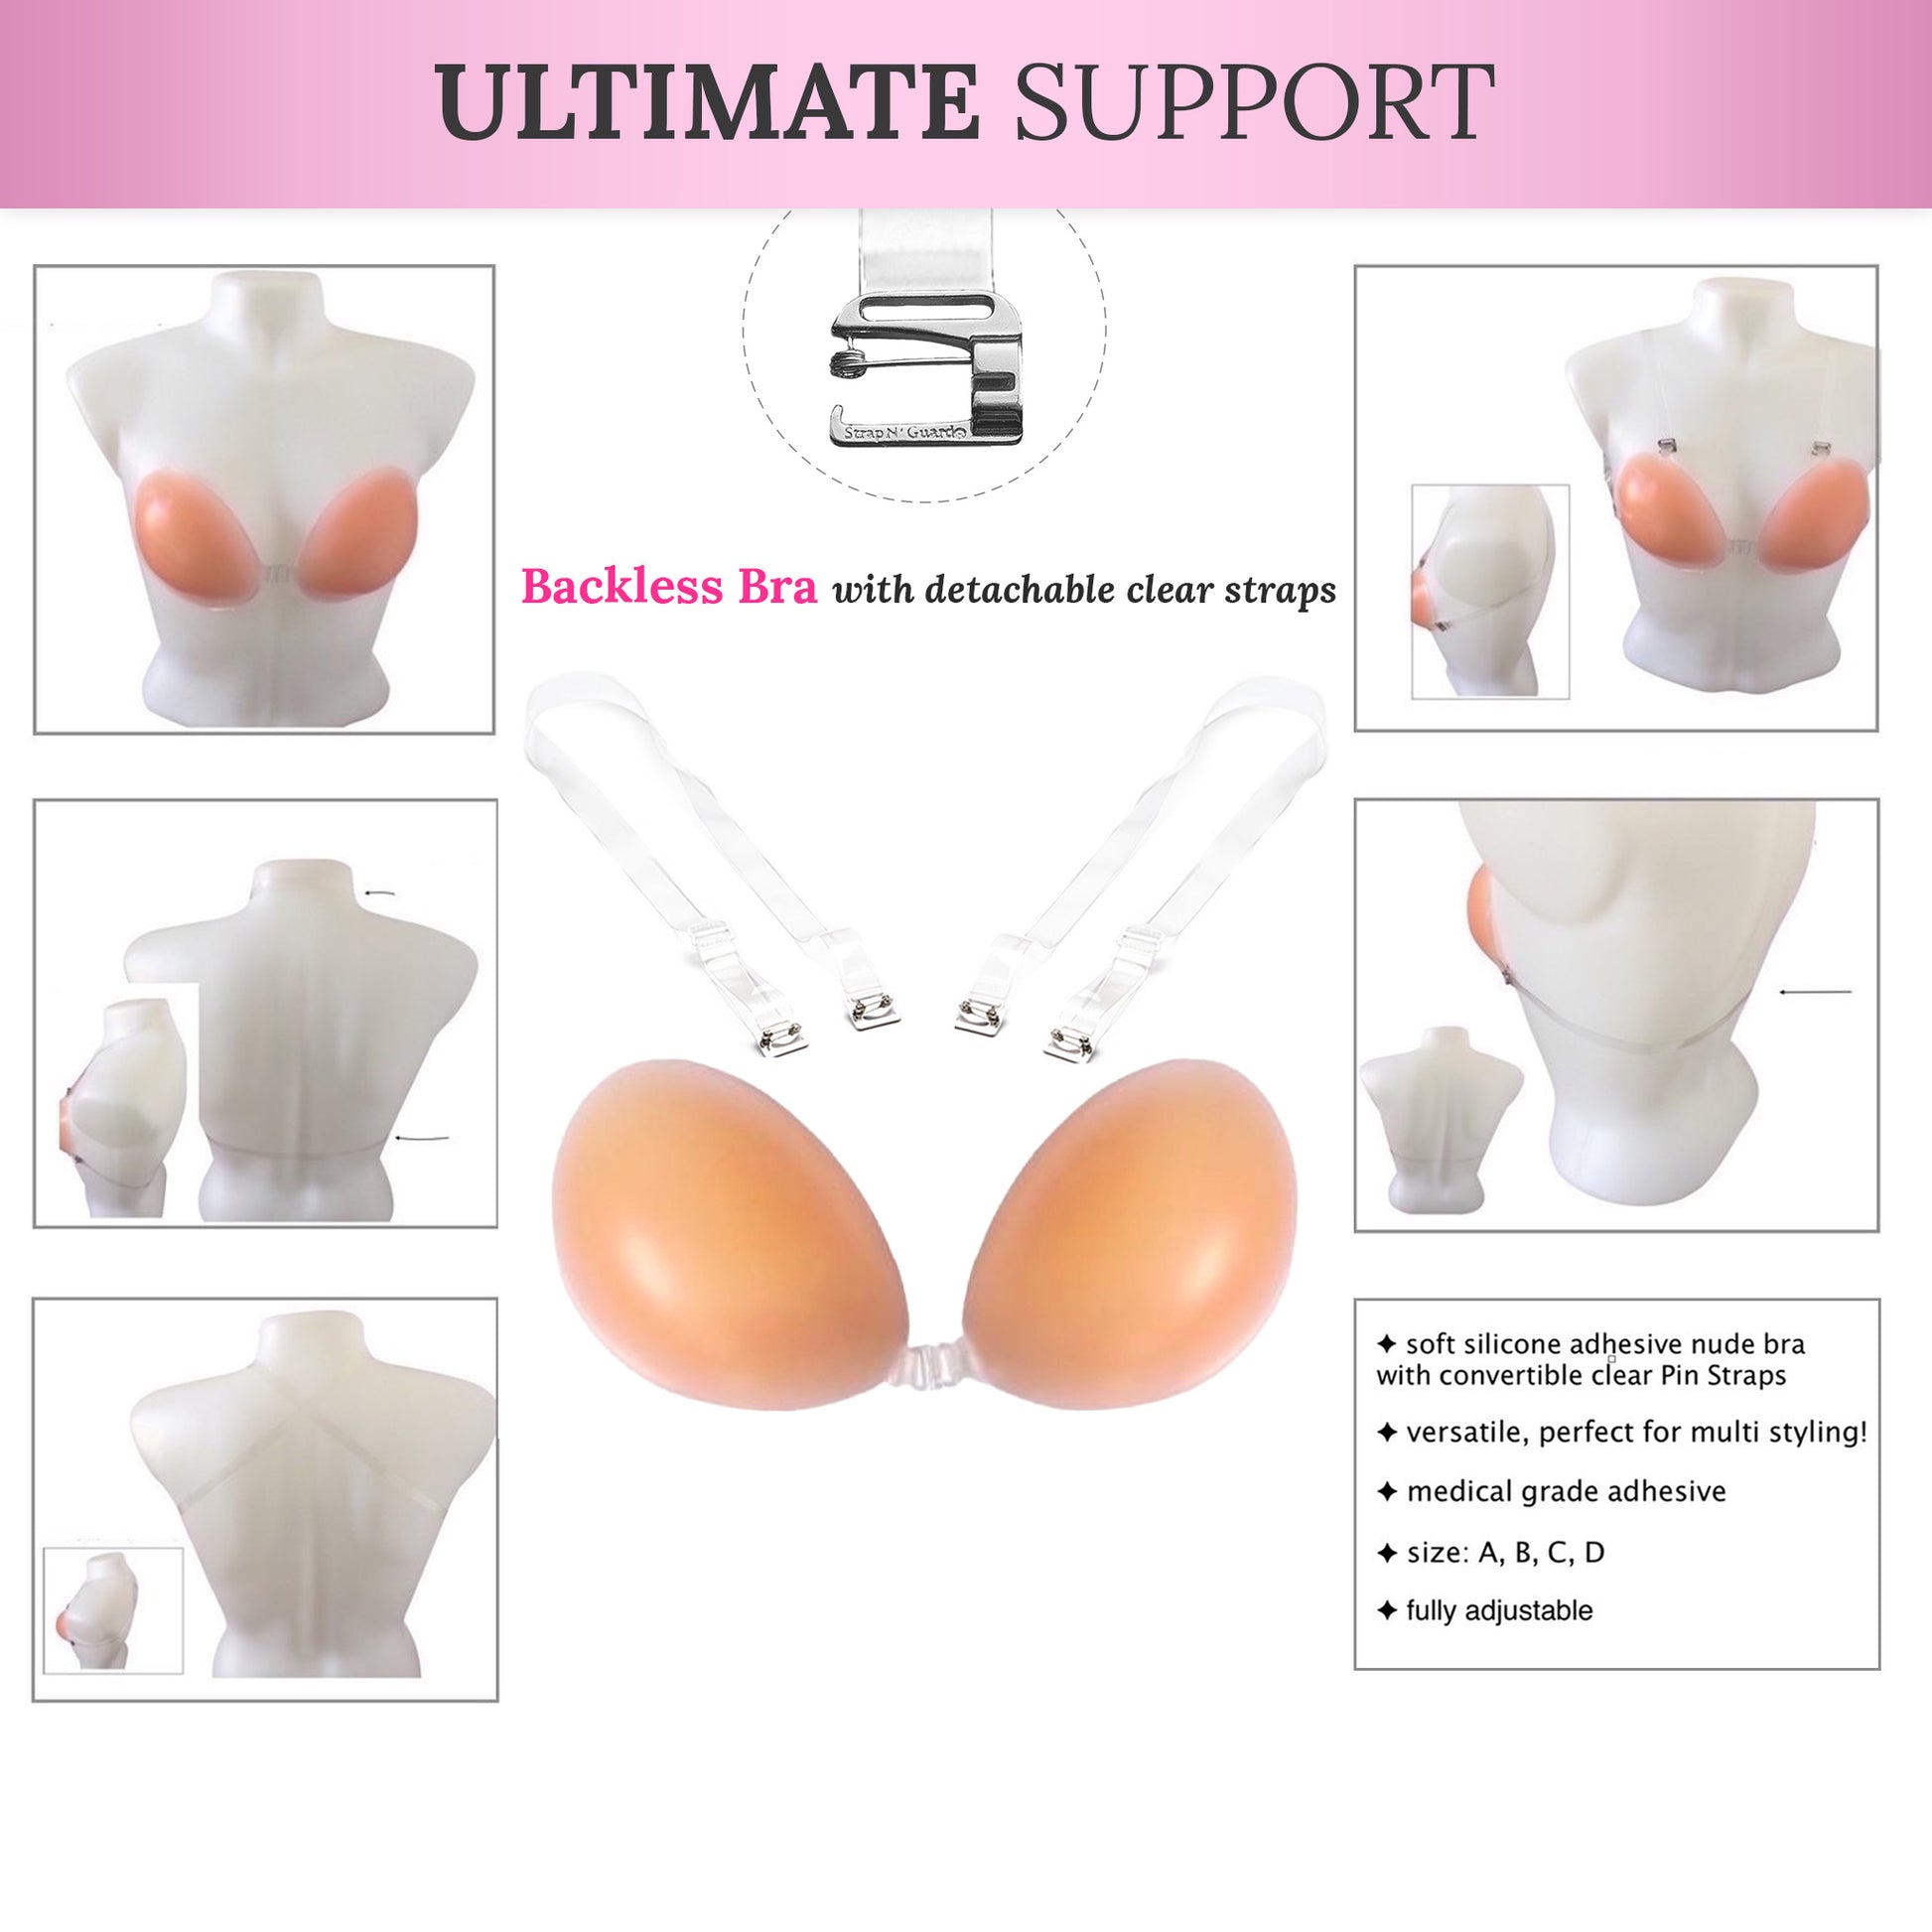 Backless Adhesive Silicone Bra